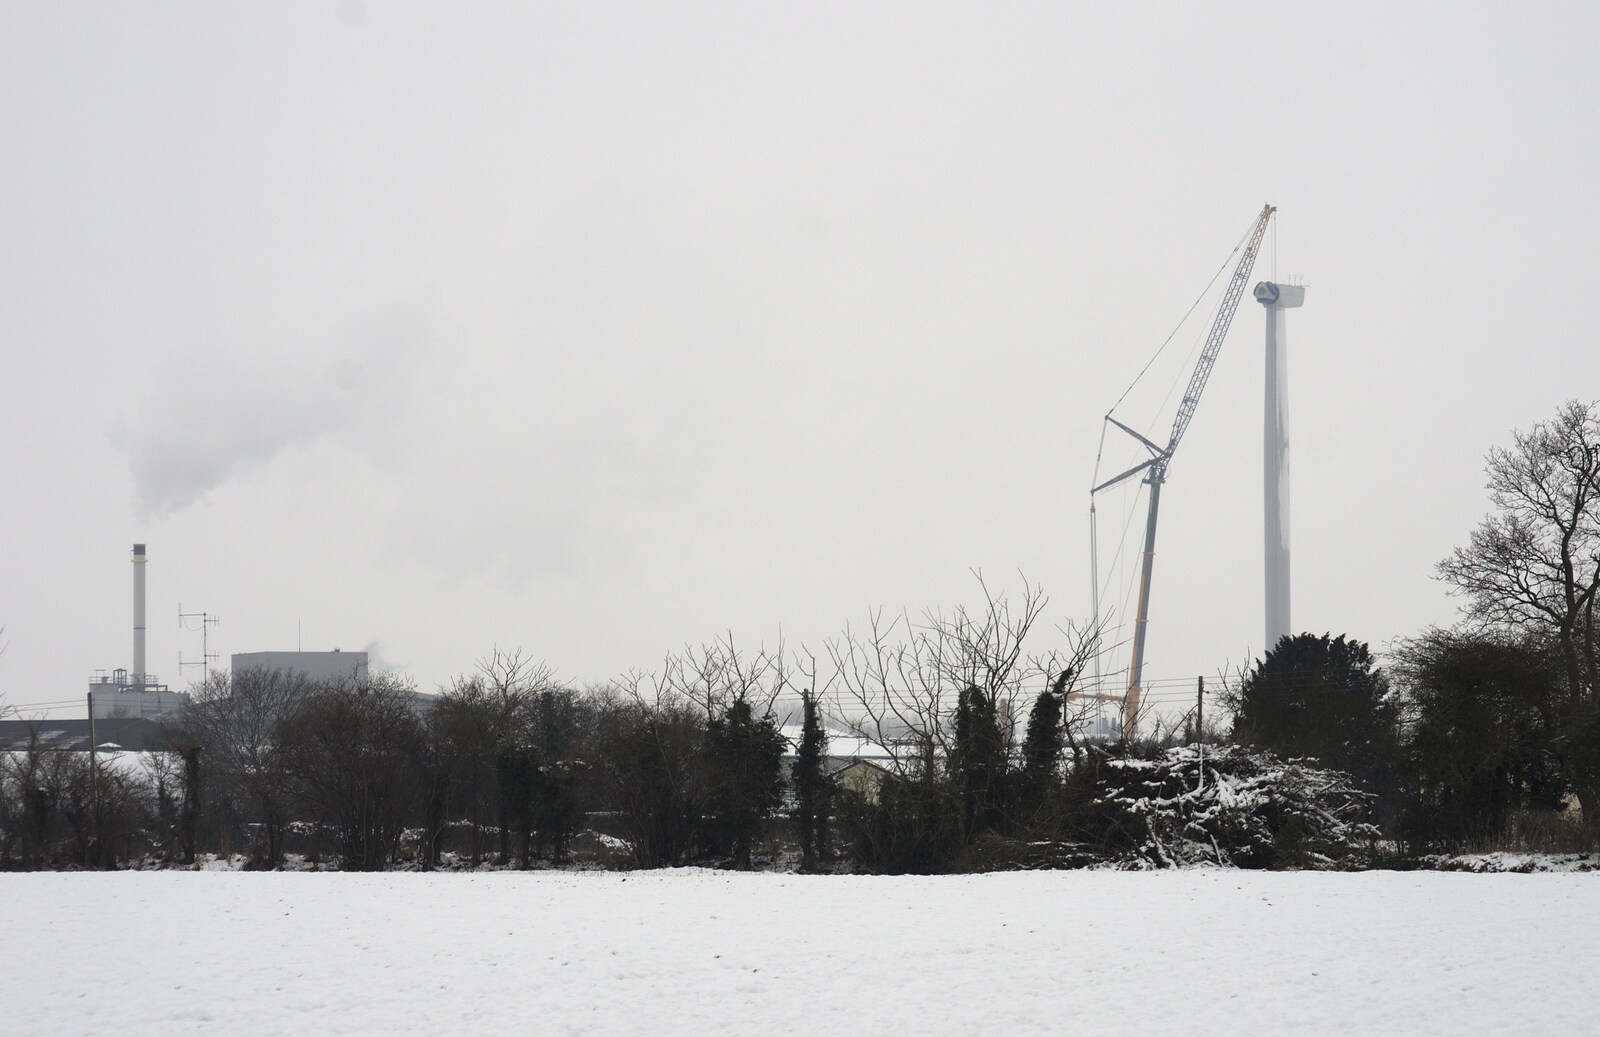 More Snow Days and a Wind Turbine is Built, Brome, Suffolk - 19th January 2013: The first turbine goes up